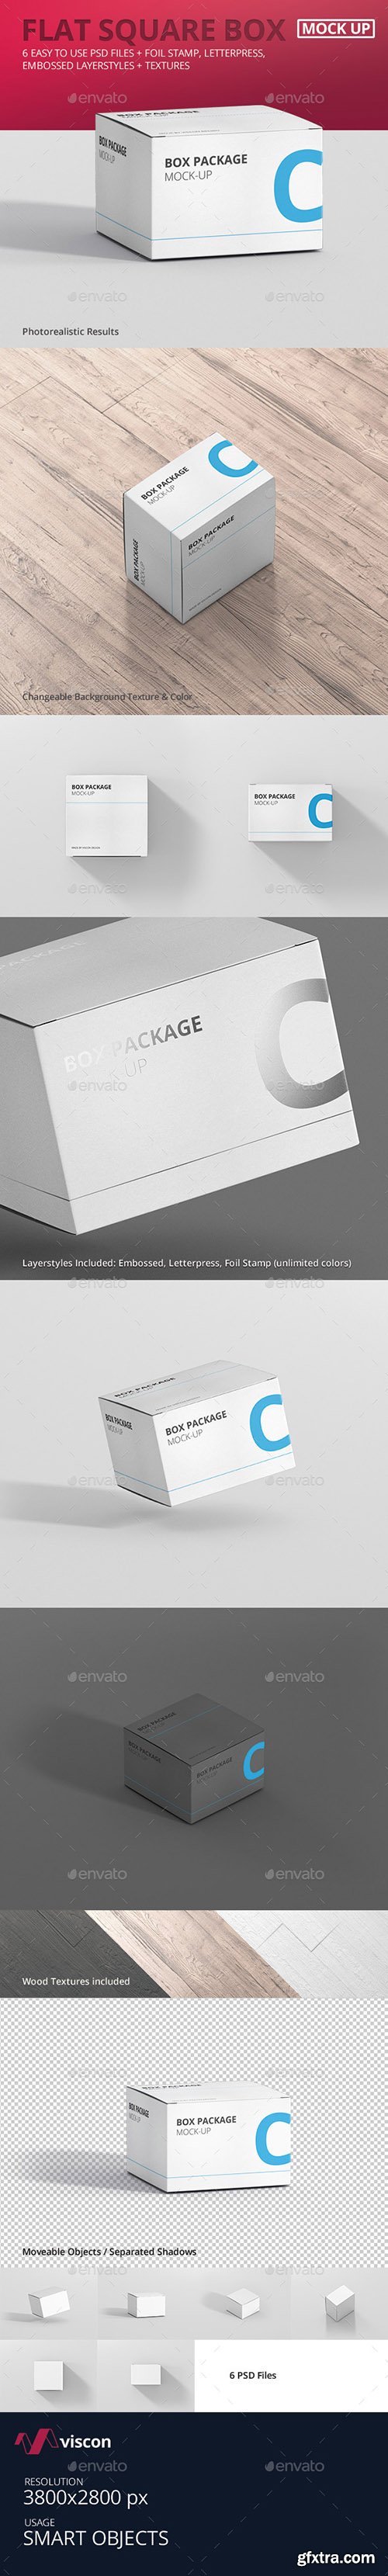 Graphicriver Package Box Mock-Up - Flat Square 16254400